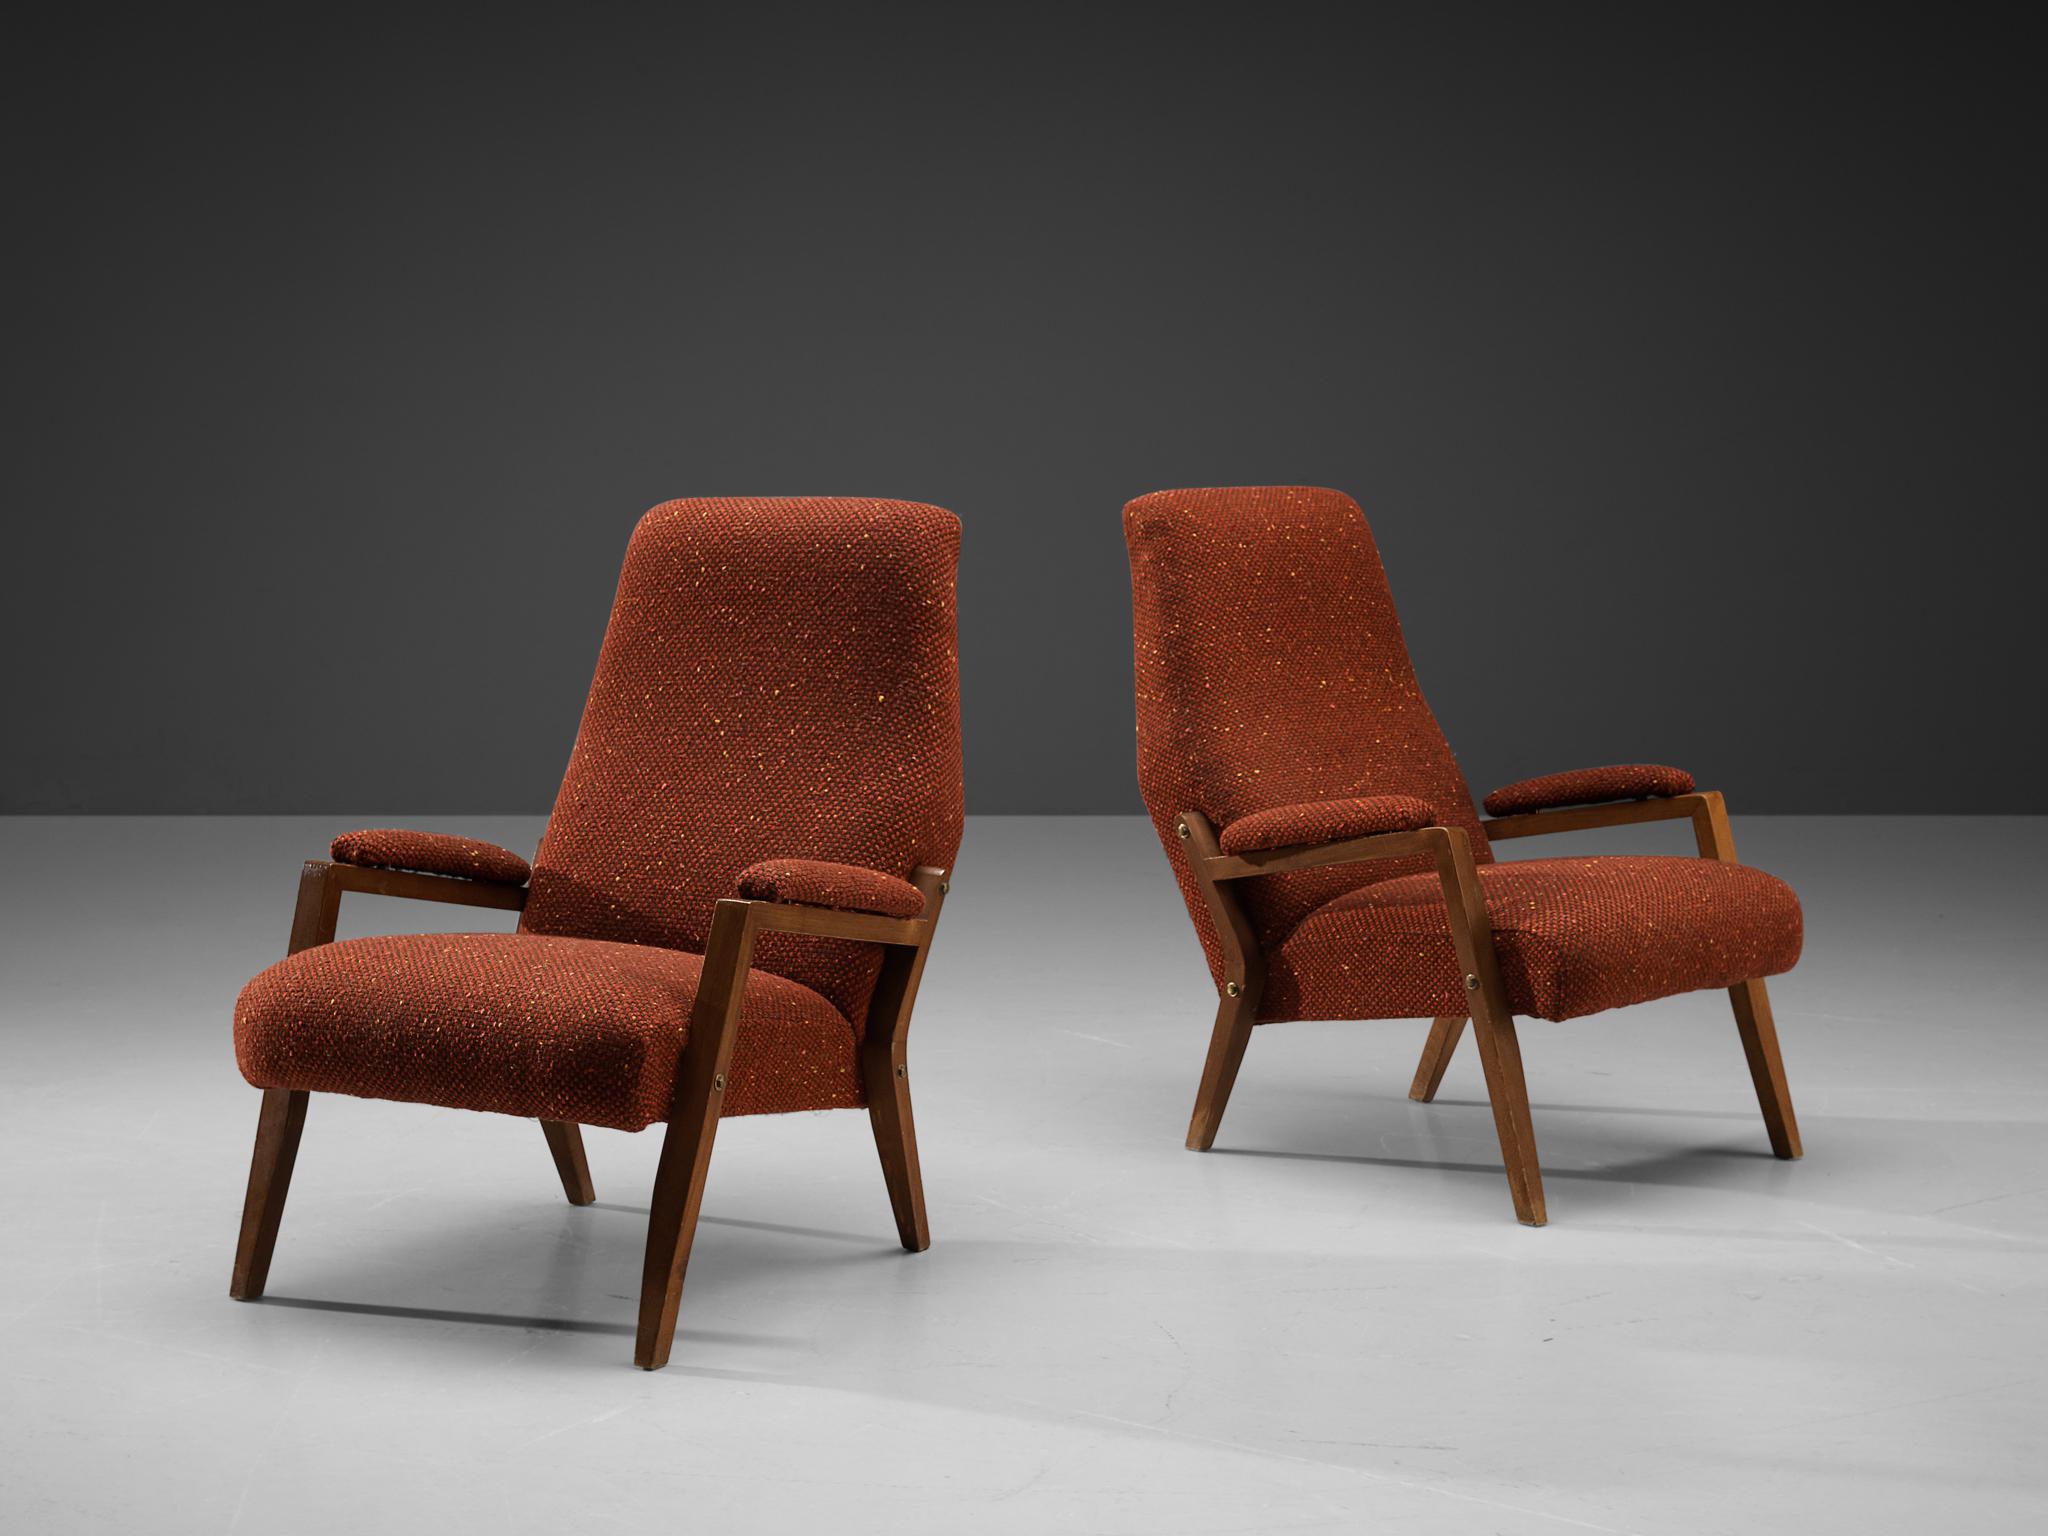 Pair of armchairs, beech, fabric, Italy, 1960s.

This pair of sculptural Italian lounge chairs is characterized by a solid construction, that is noticeable in the shape of the arms and the slightly titled elongated backrest that underline the clear